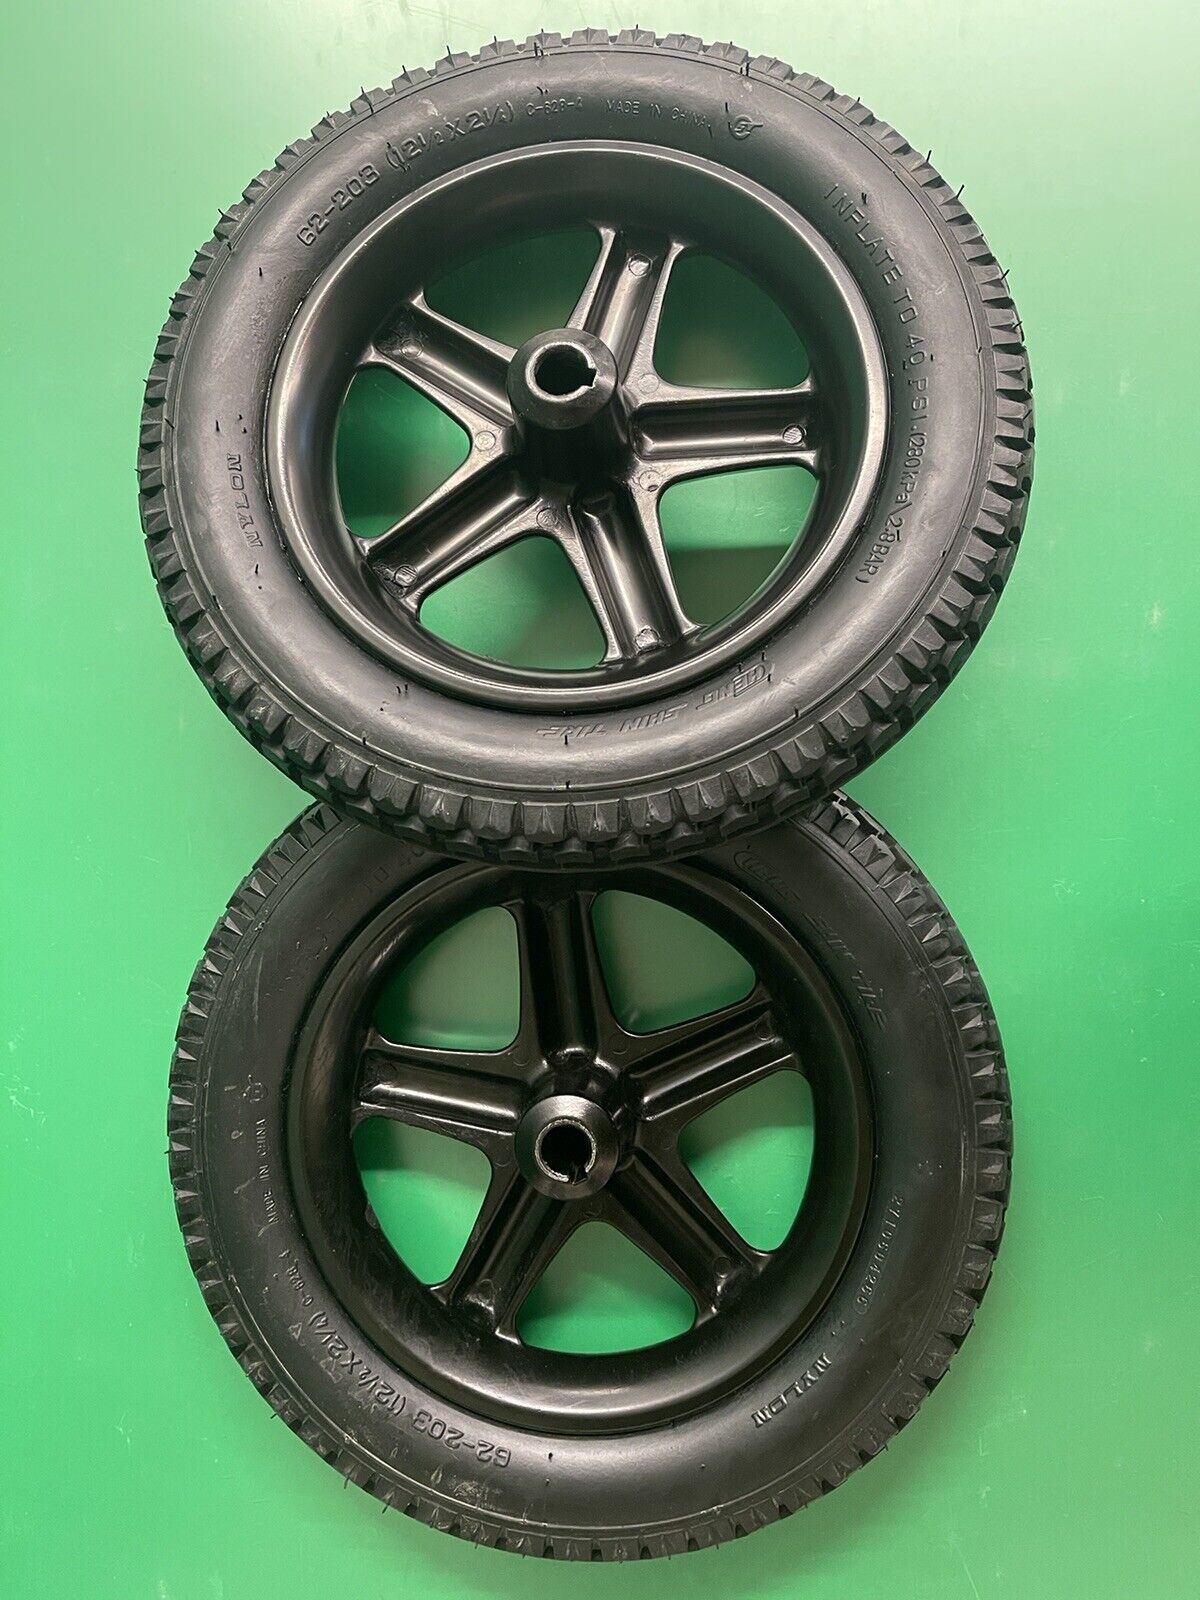 12.5" Rear Wheel Assembly for Drive Cirrus Plus EC Power Wheelchair -MINT* #i251